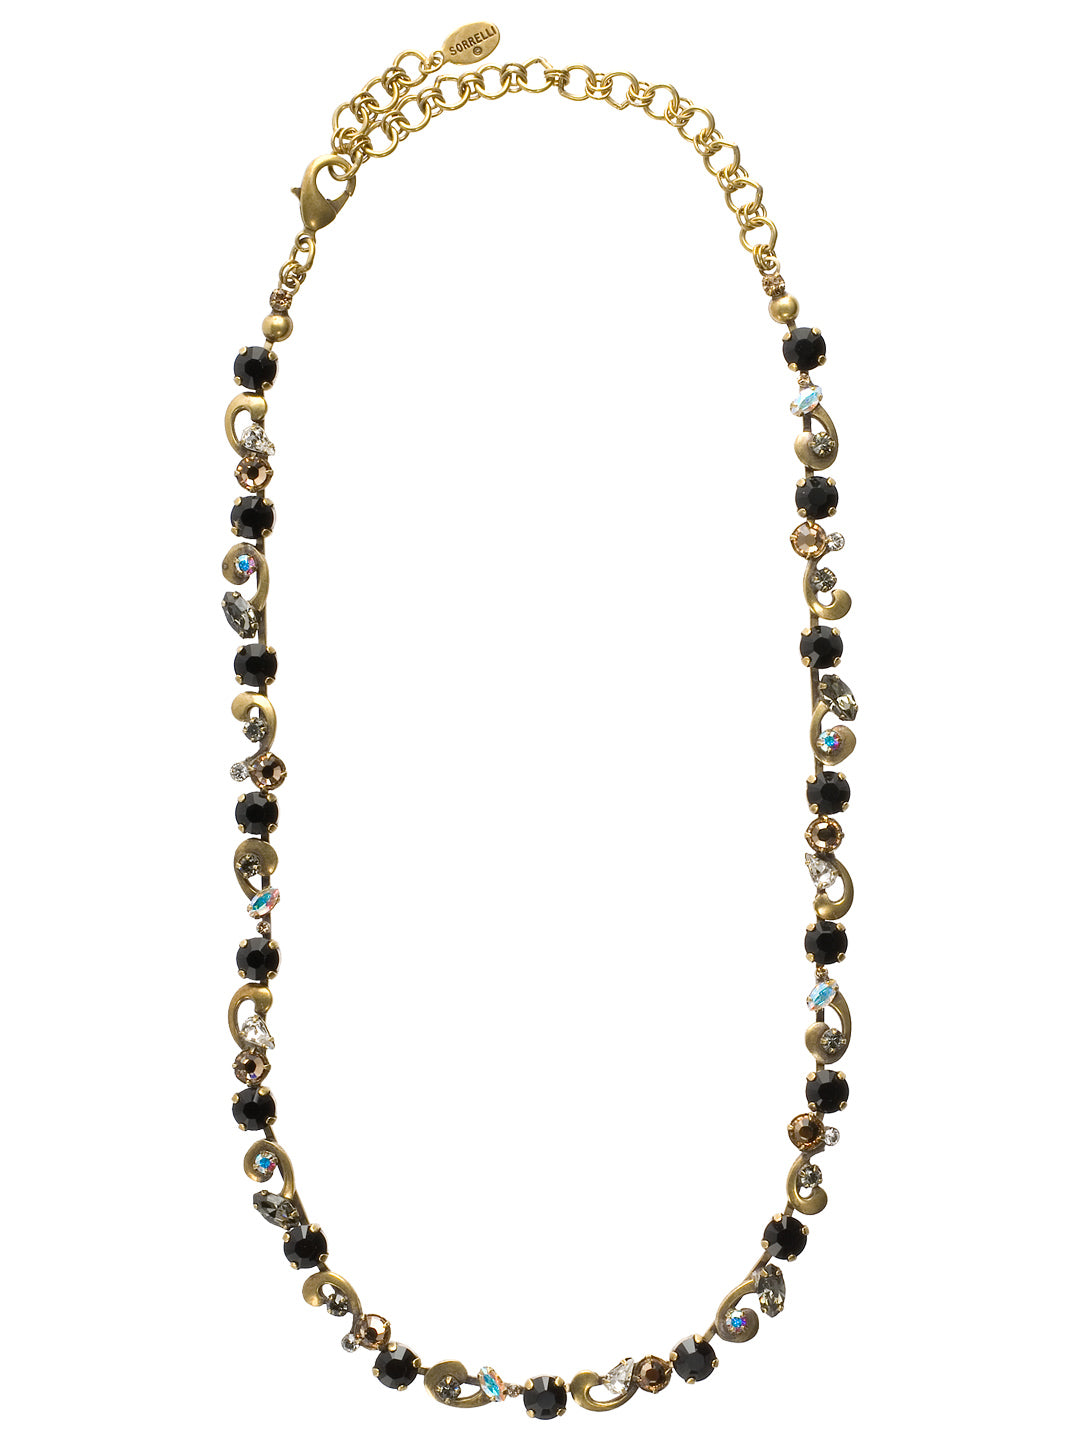 Classic Scroll Work Necklace Accented with Crystals - NCB1AGEM